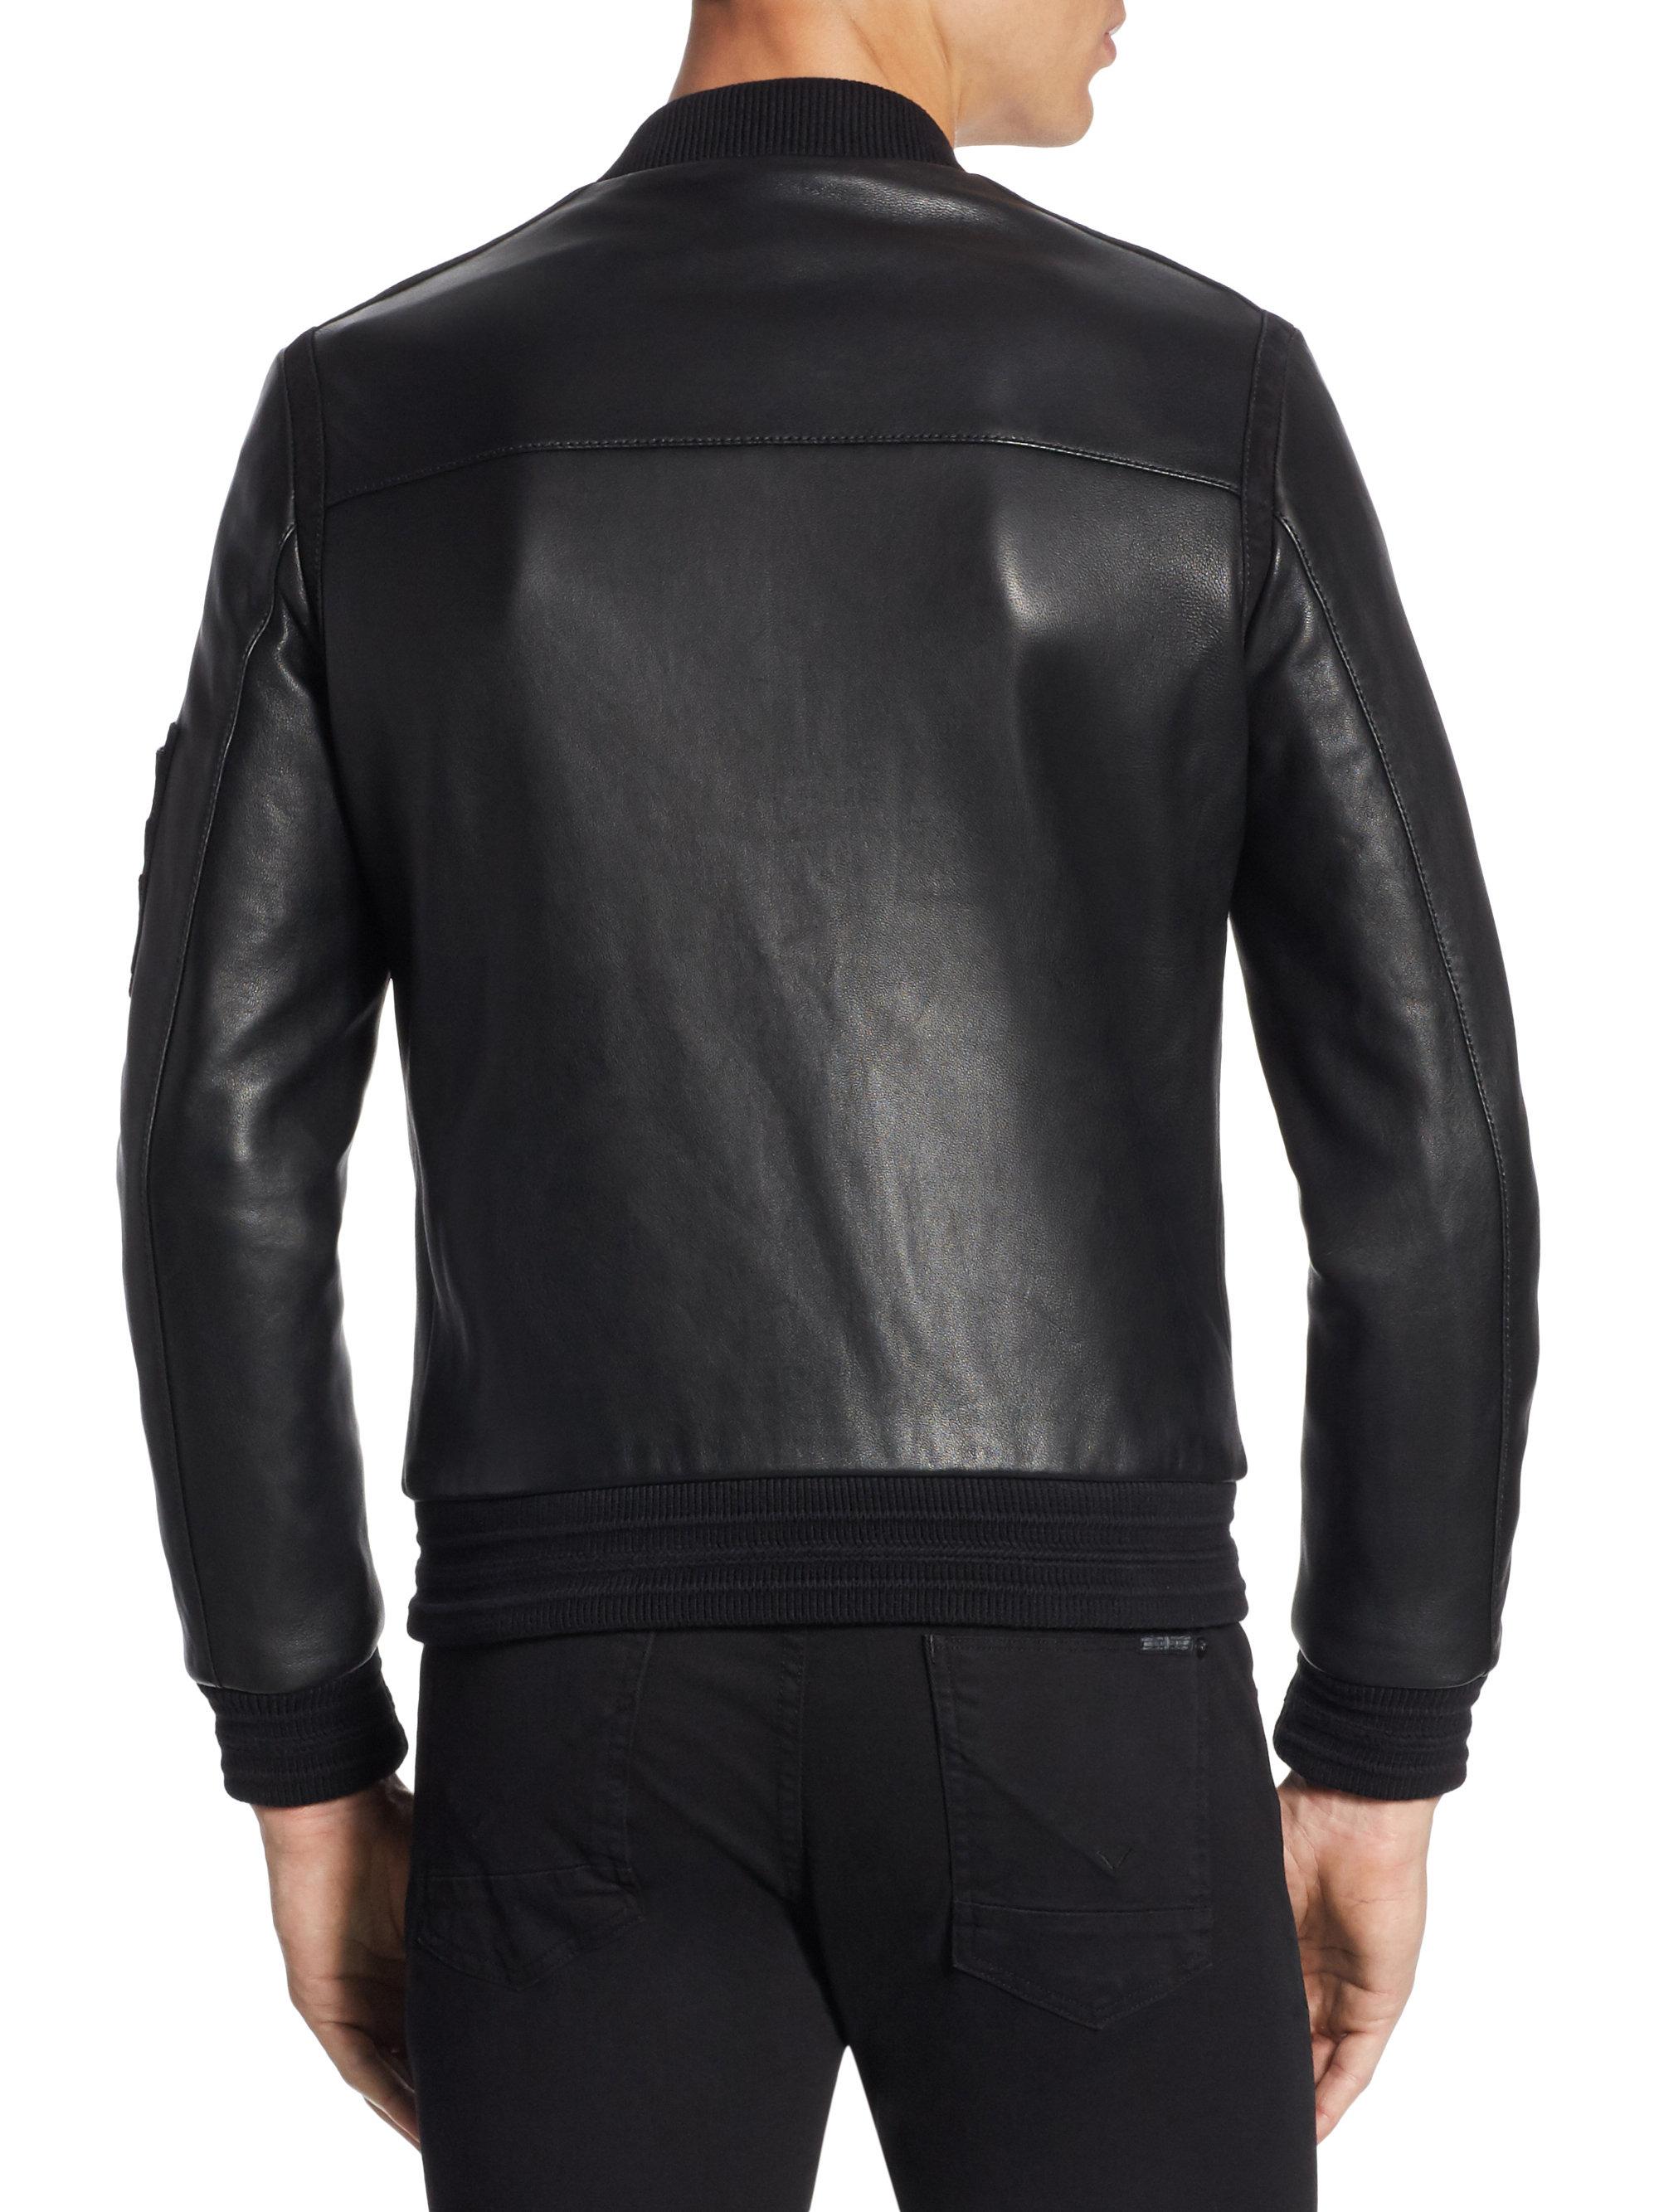 The Kooples Synthetic Zippered Long Sleeve Jacket in Black for Men - Lyst